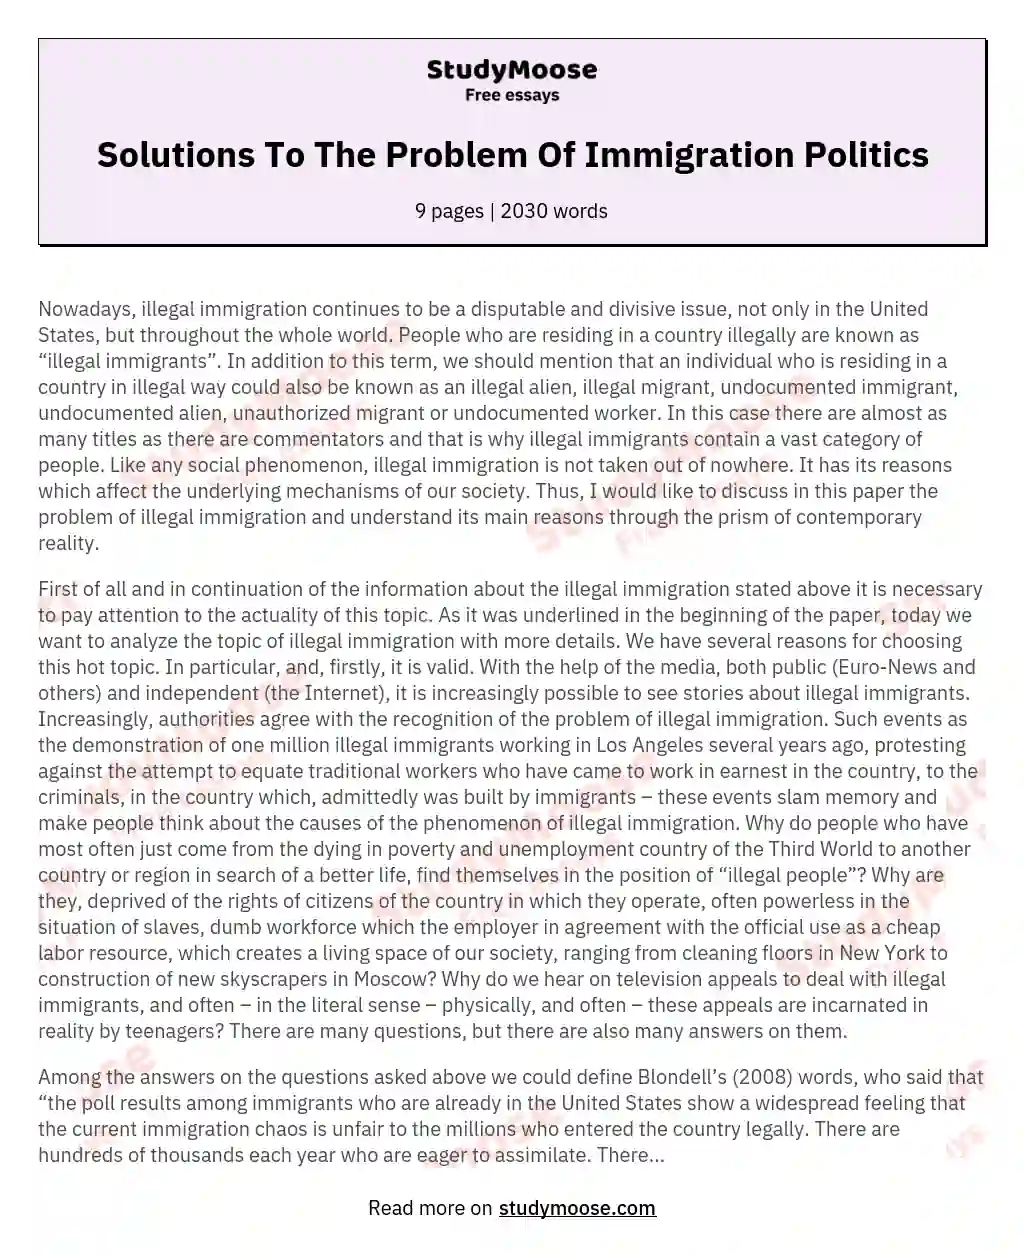 Solutions To The Problem Of Immigration Politics essay